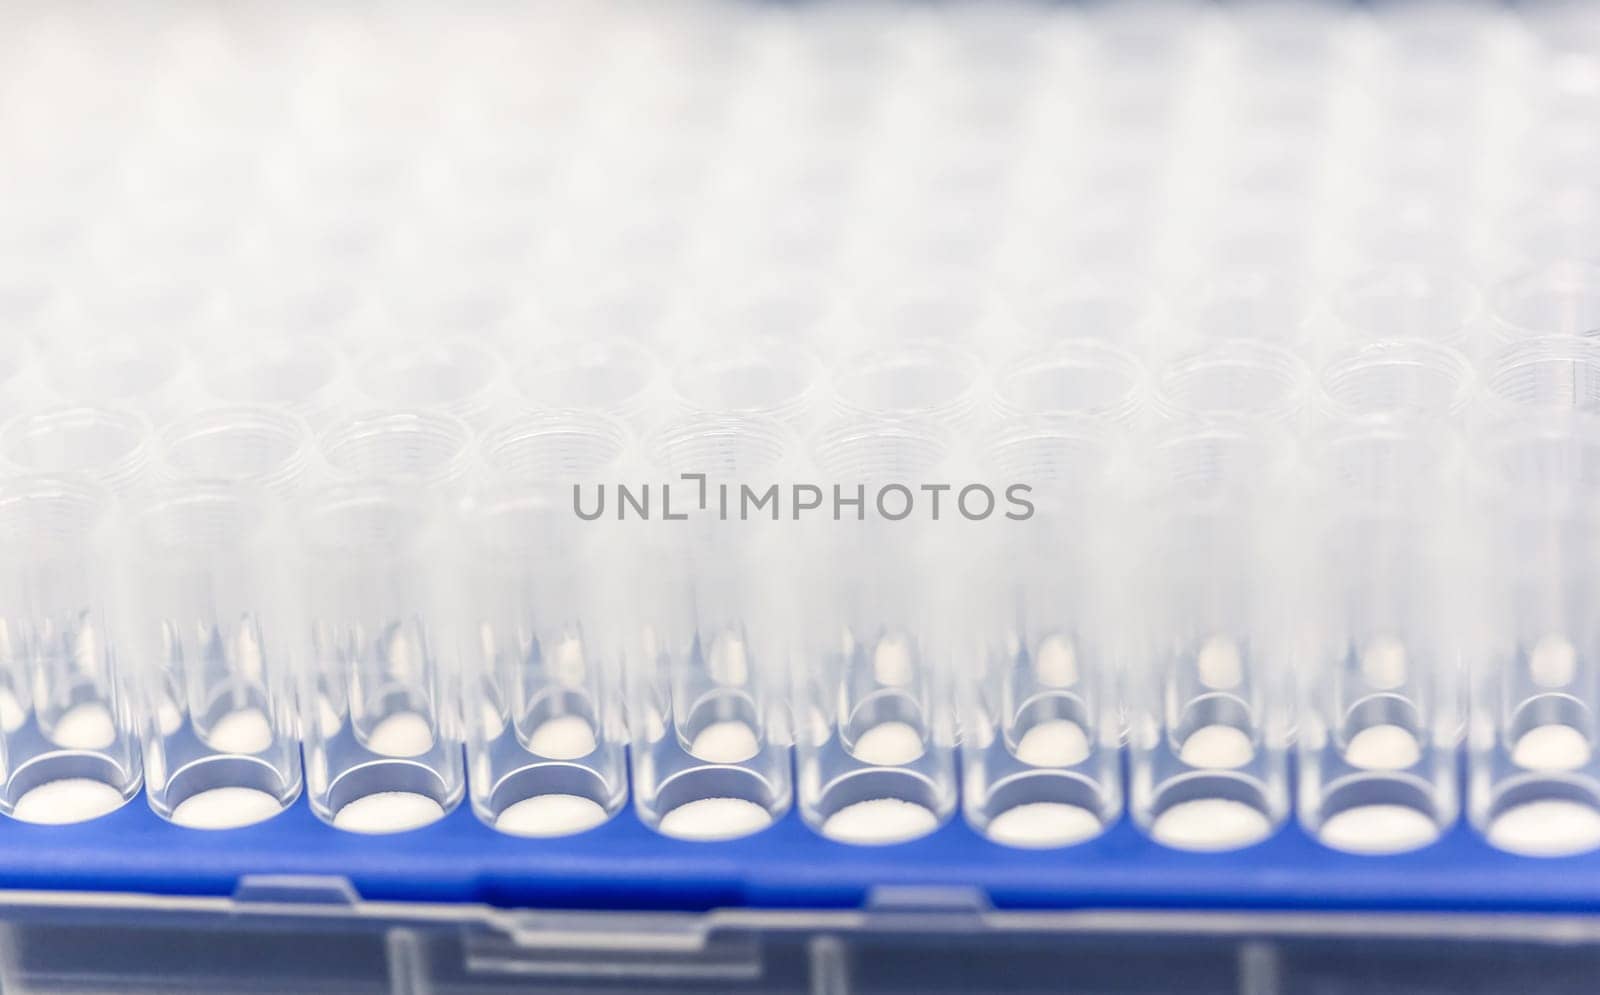 A set of glass tubes for samples. Laboratory chemical equipment. Analyzes DNA